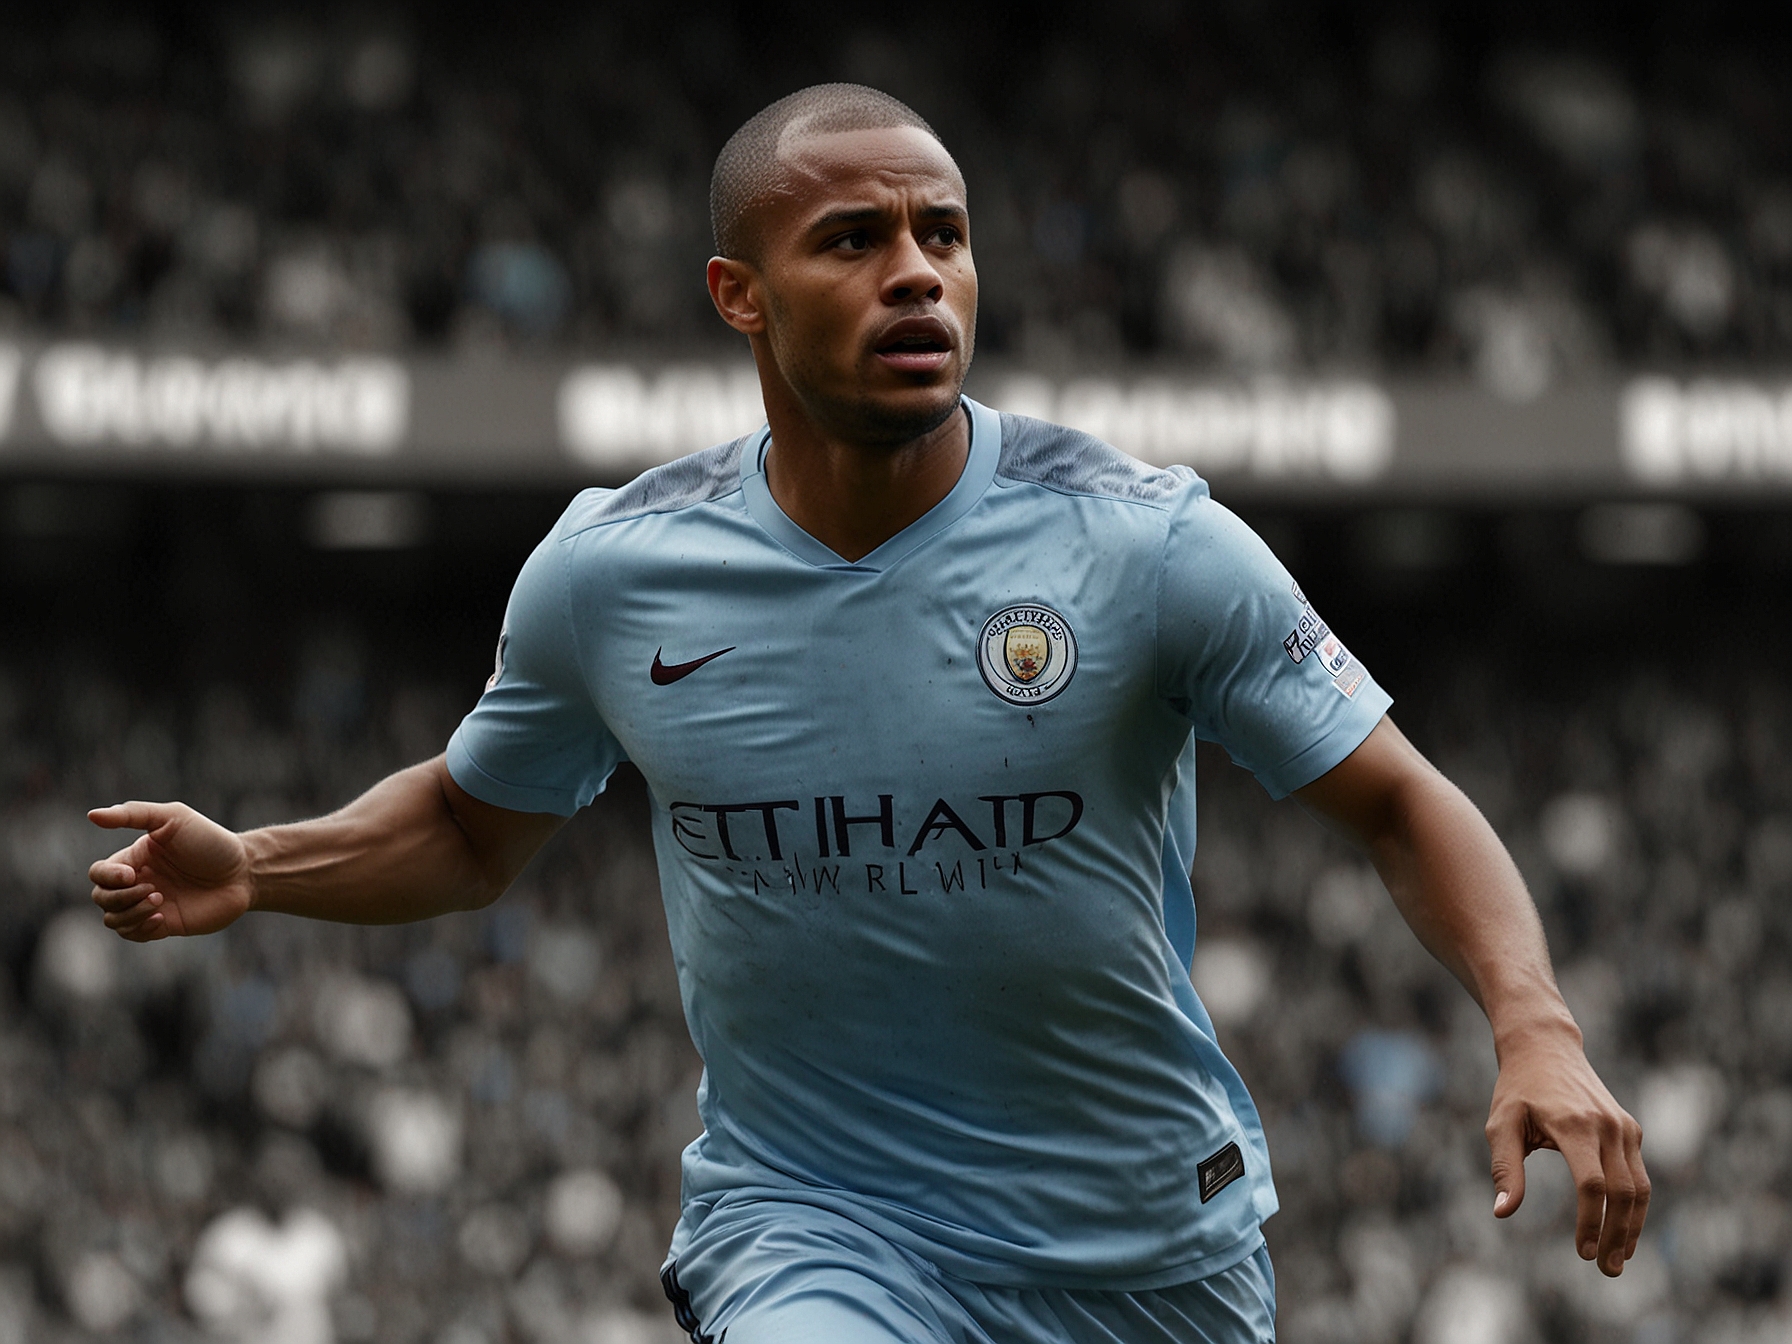 The Manchester City midfielder, valued at £50 million, skillfully navigating the field, showcasing the ball-handling skills and vision that Kompany admires and wishes to bring to Bayern Munich.